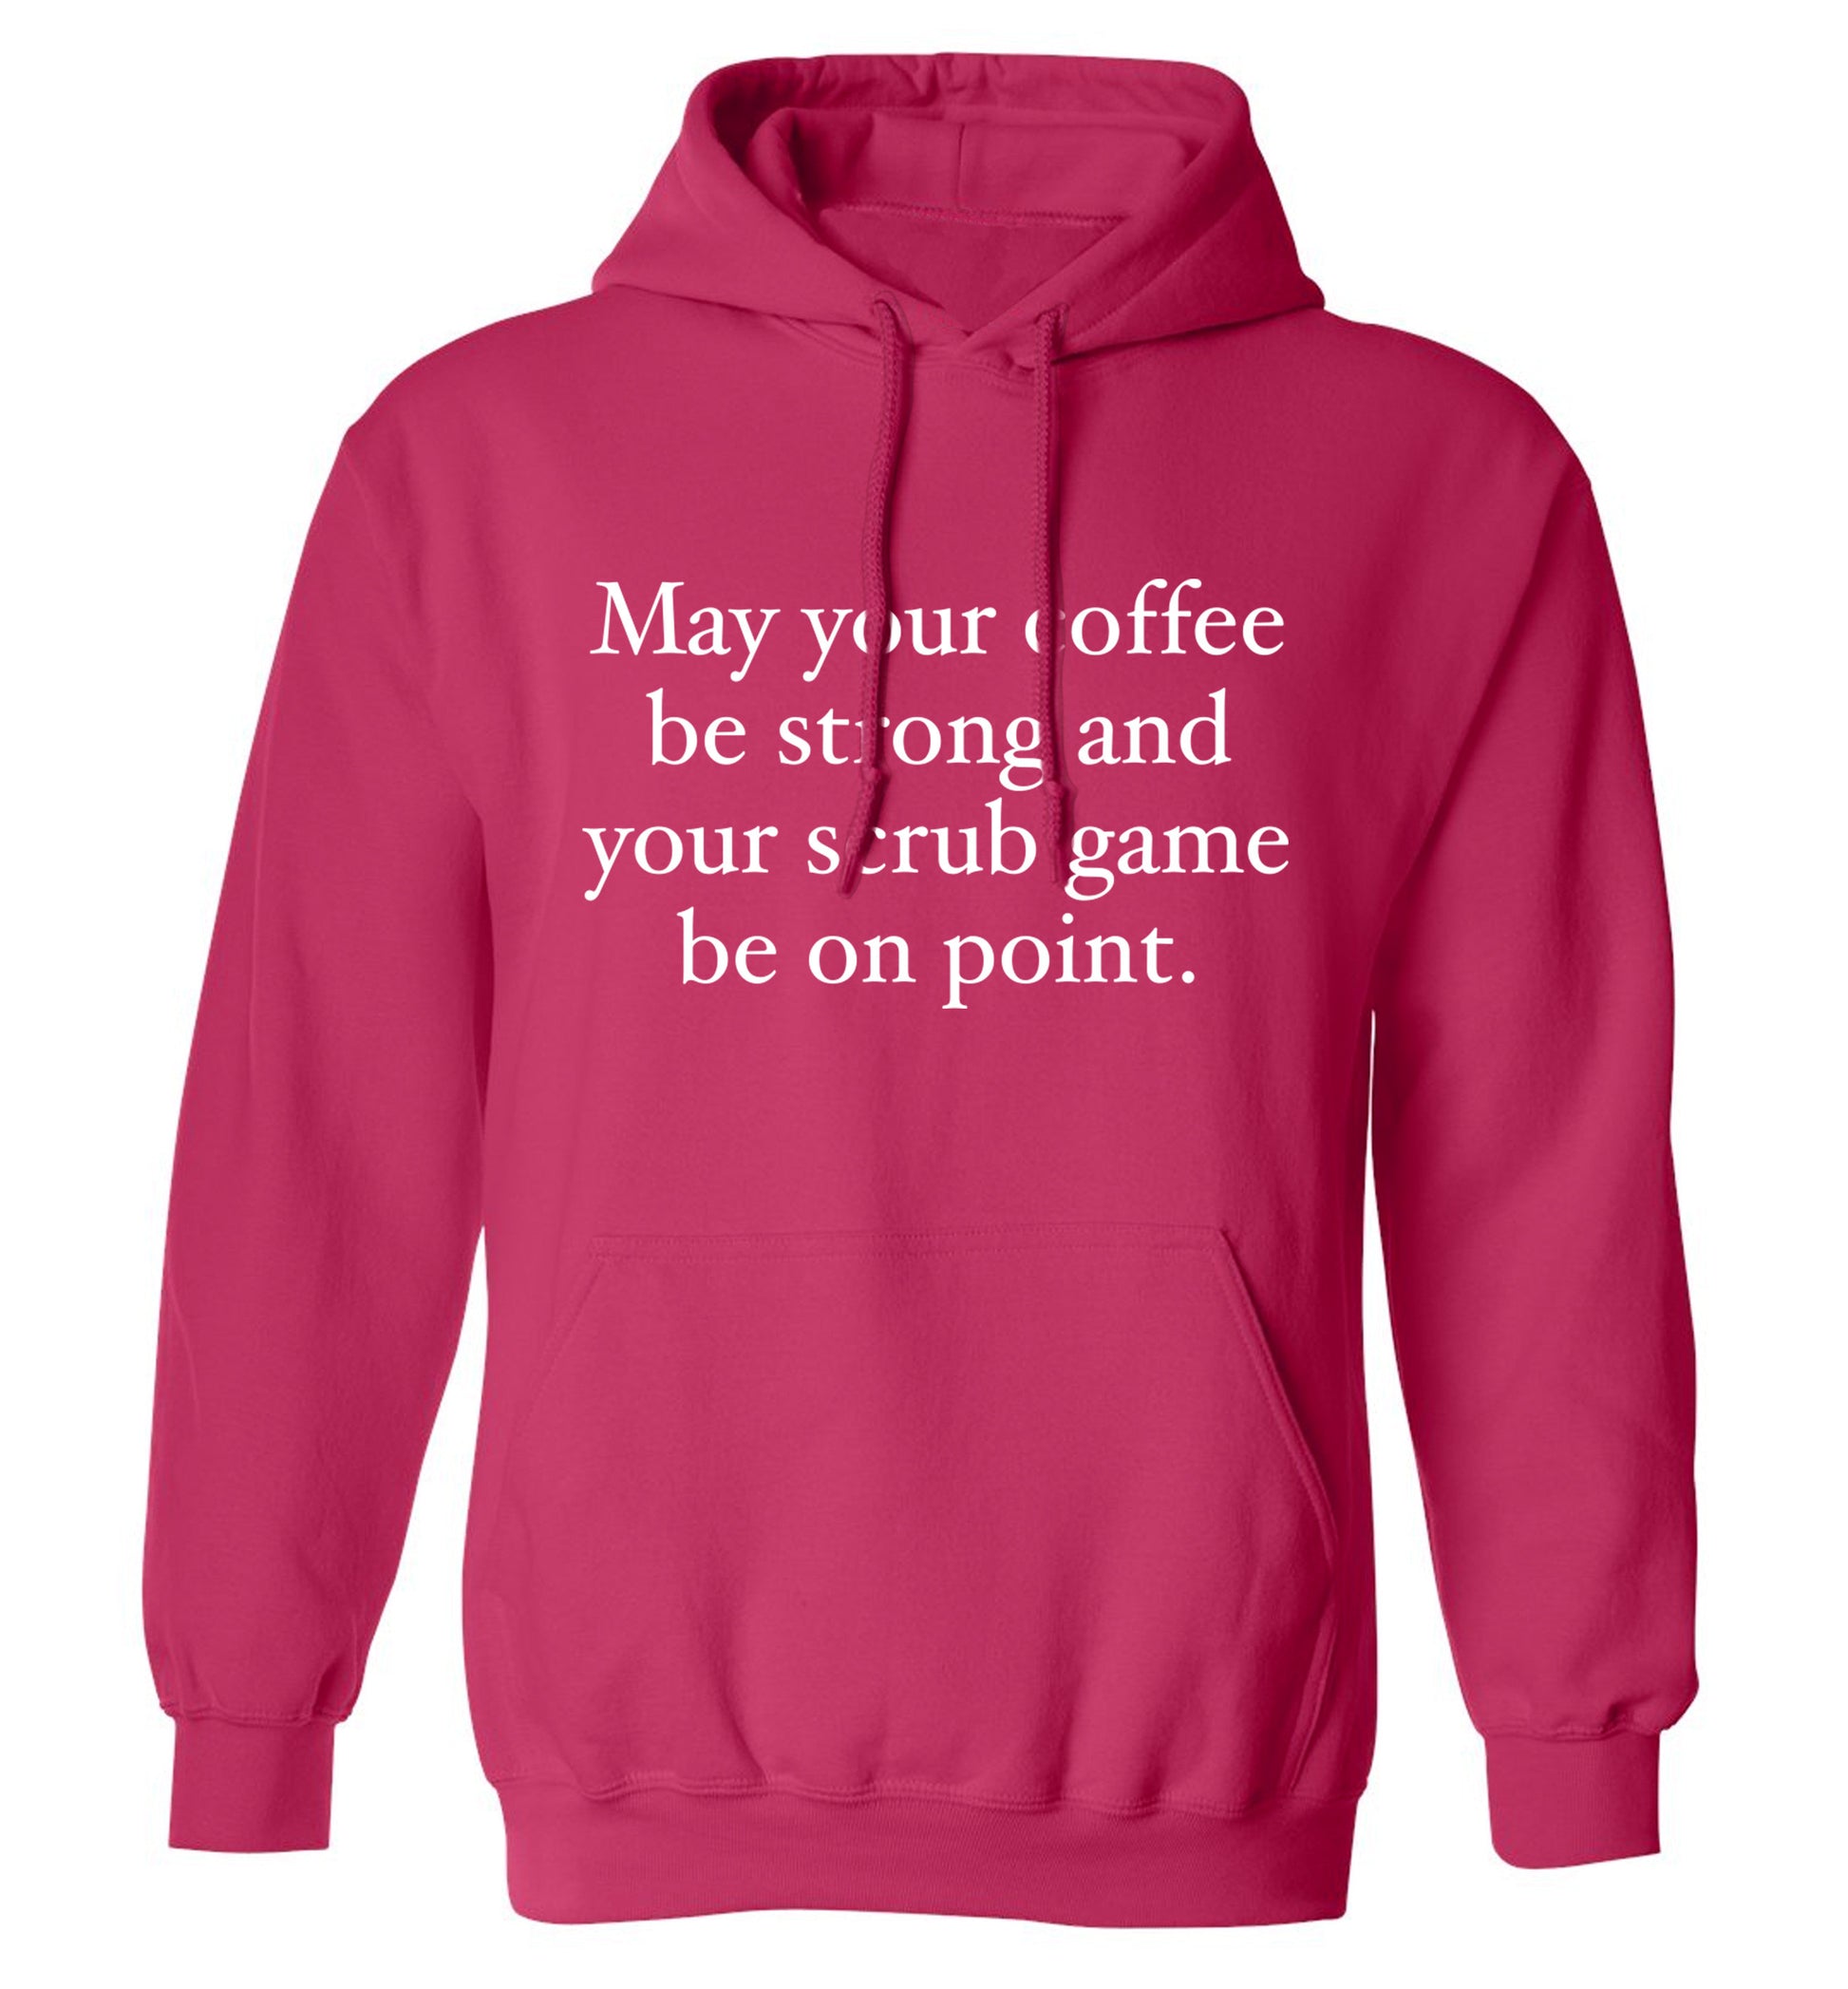 May your caffeine be strong and your scrub game be on point adults unisex pink hoodie 2XL